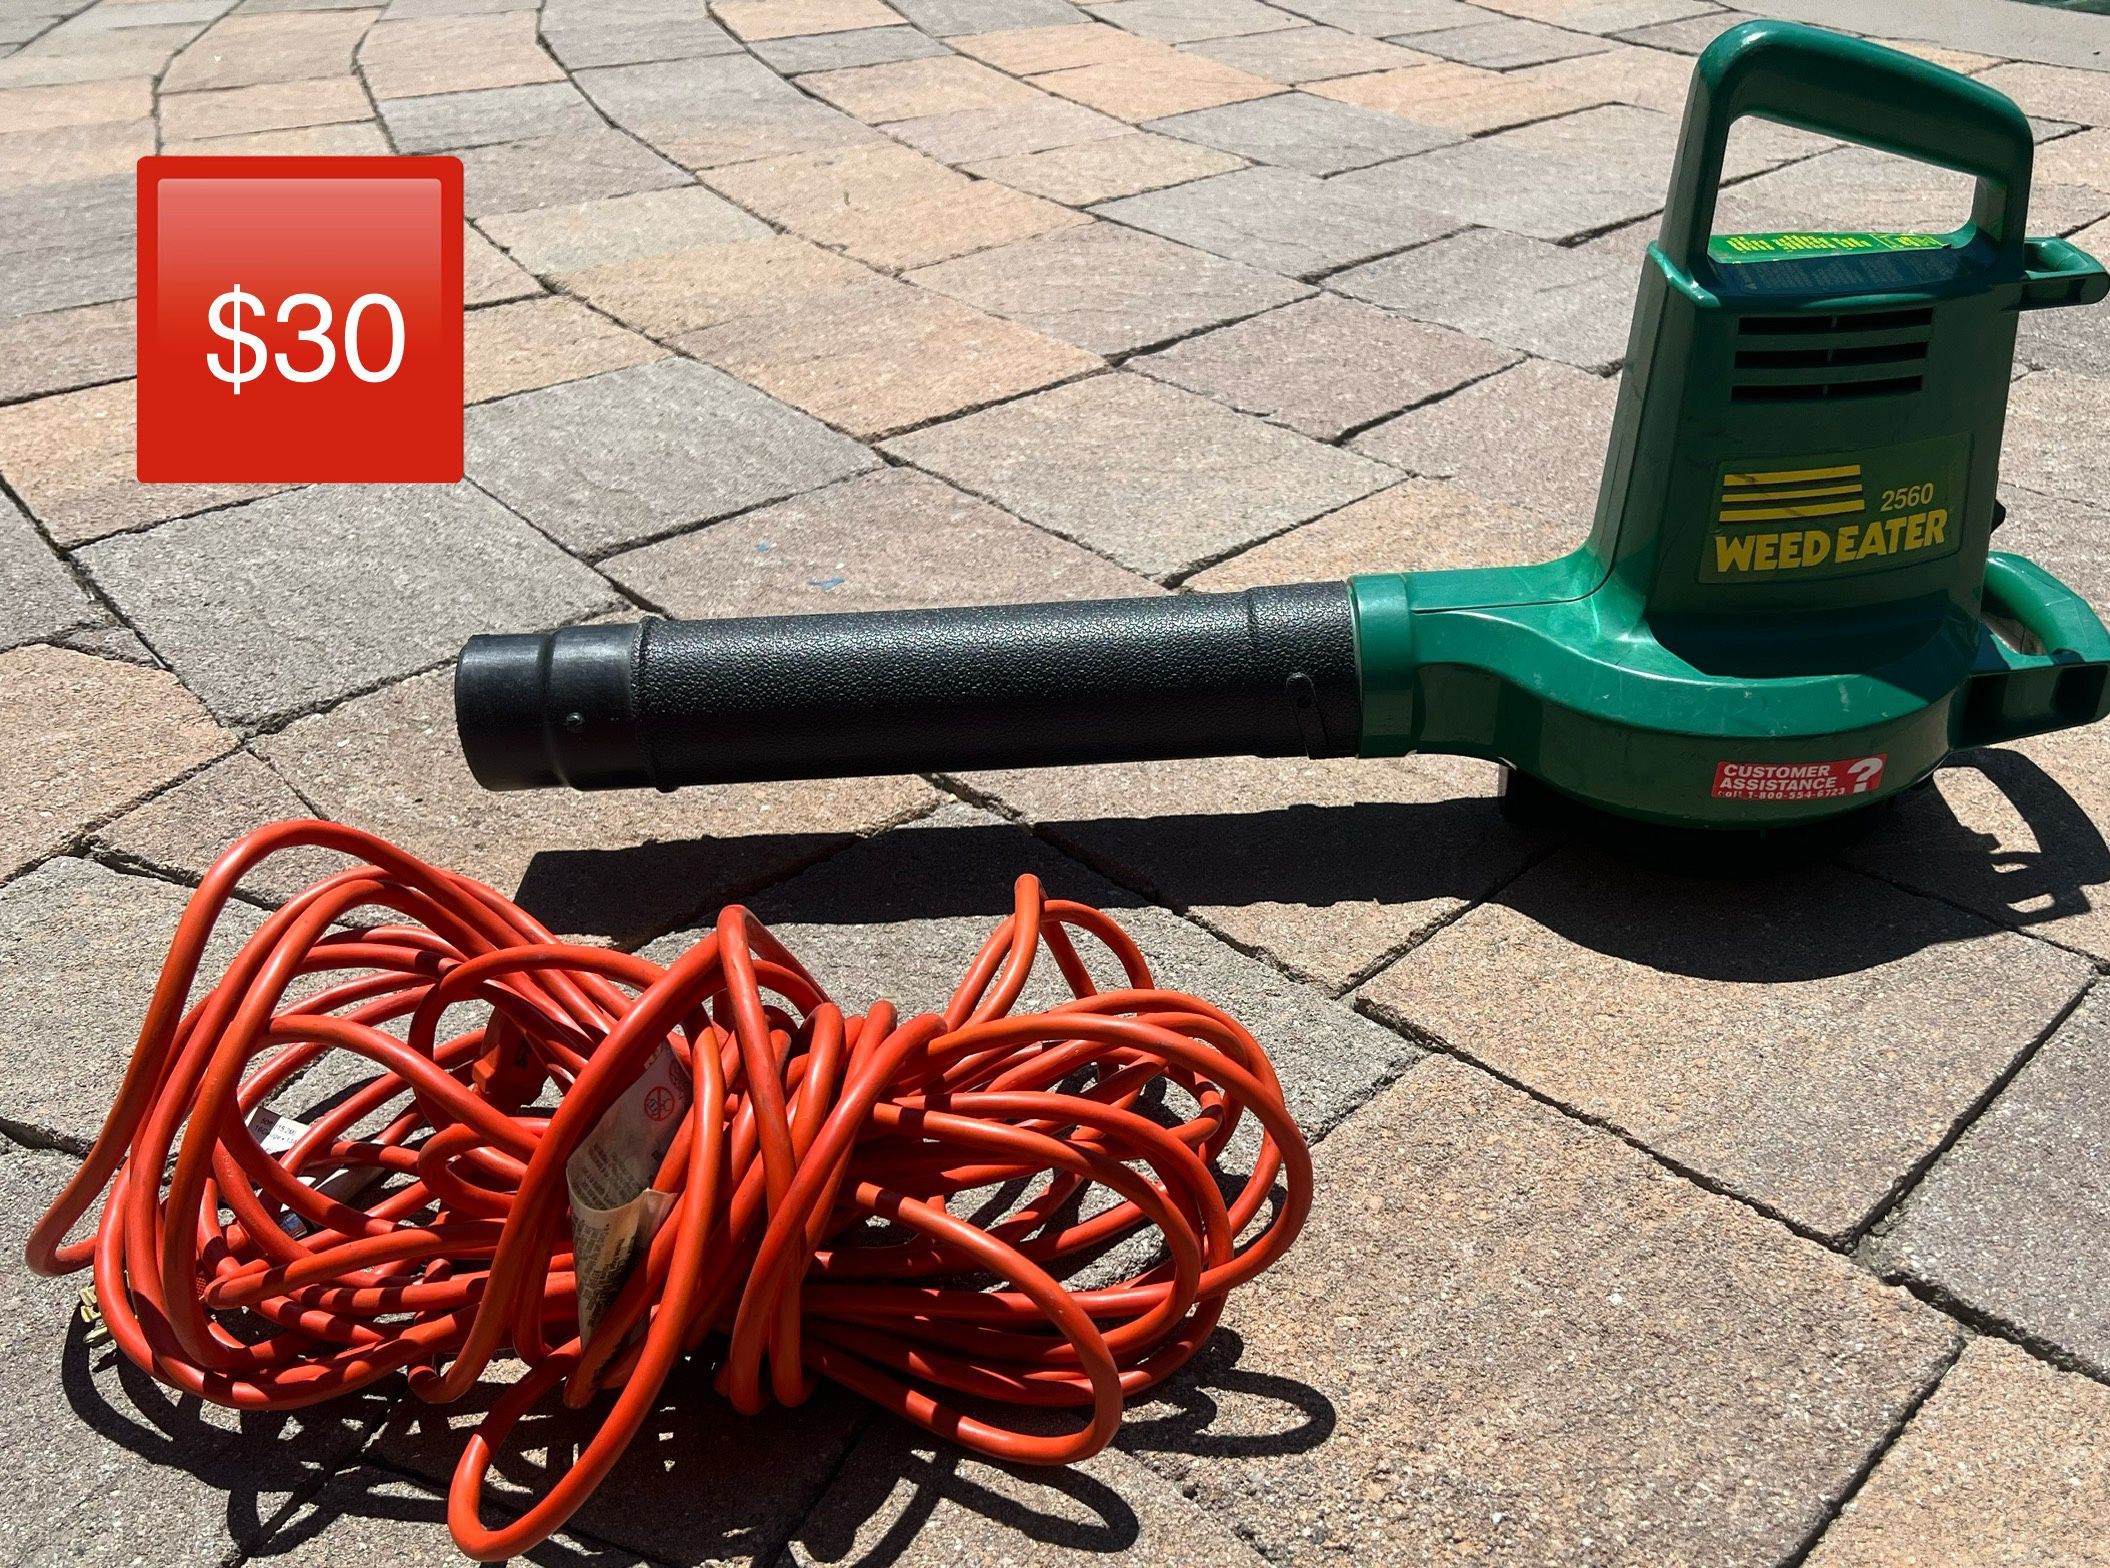 $30 WEEDEATER 2560 Leaf Blower With 50ft Extension Cord  RANCHO CUCAMONGA